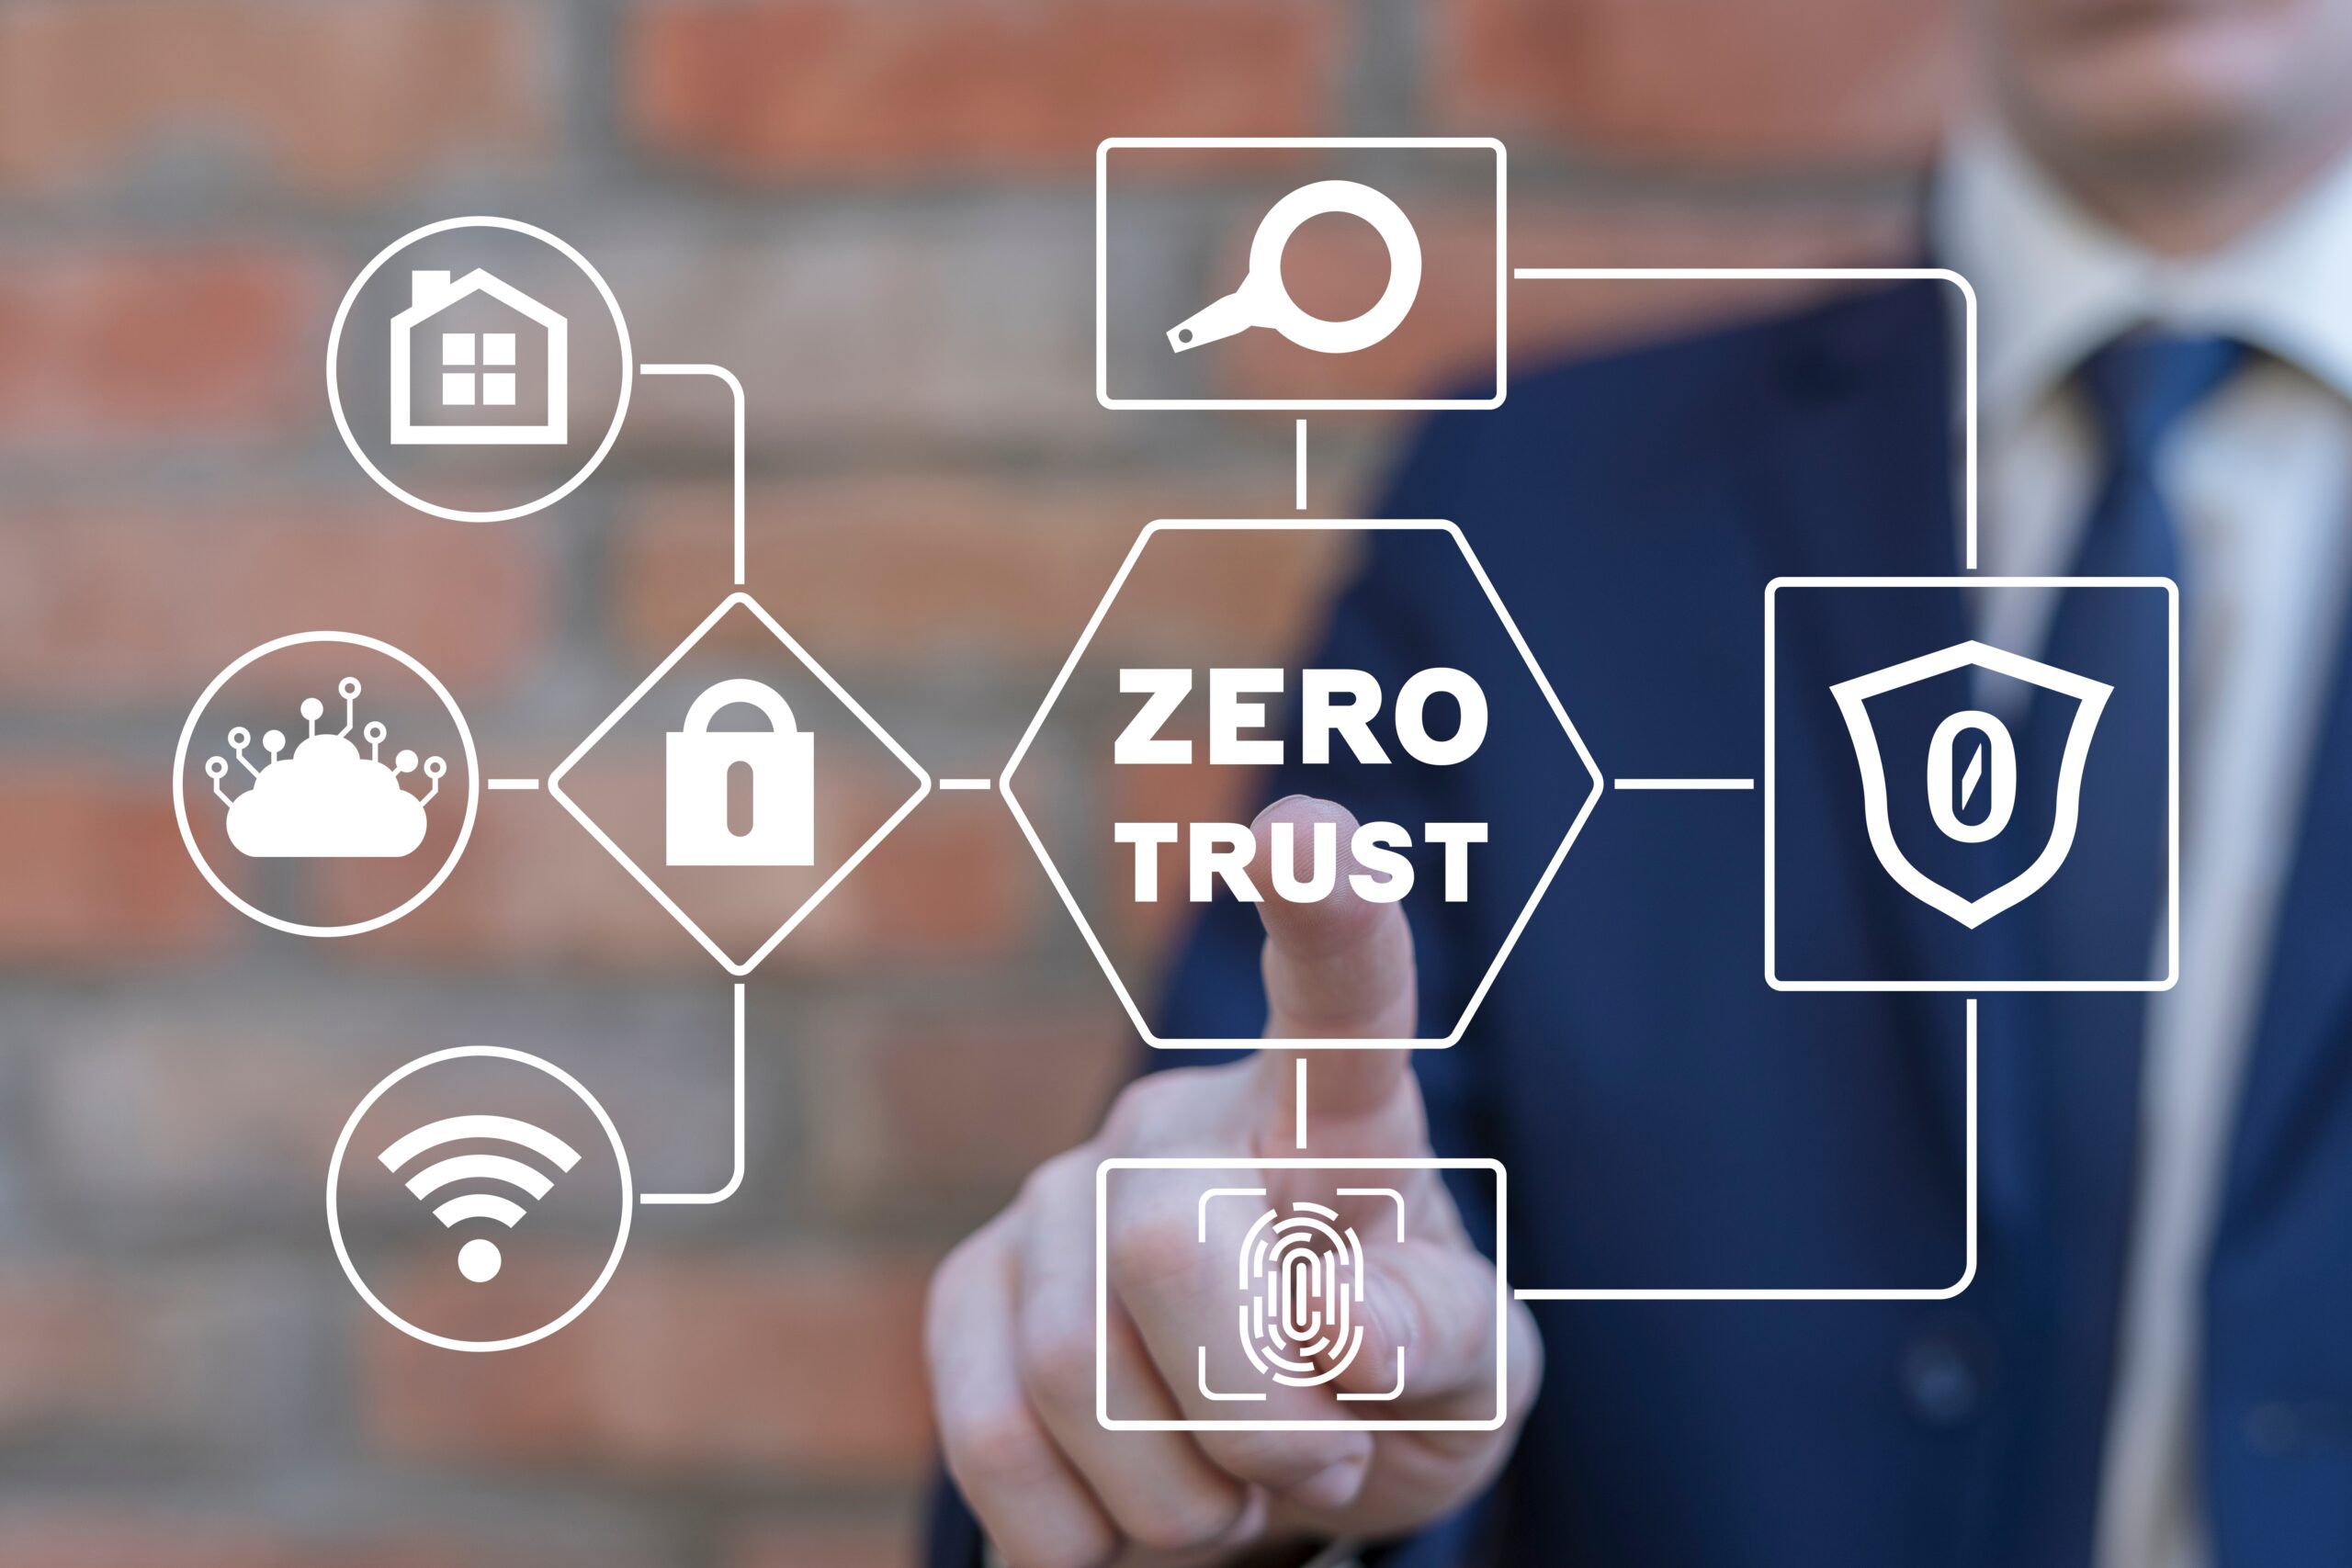 In the foreground, the words Zero Trust are surrounded by icons representing wifi, locks, networks, a home, etc. In the background, a white businessman reaches out to touch the words Zero Trust.